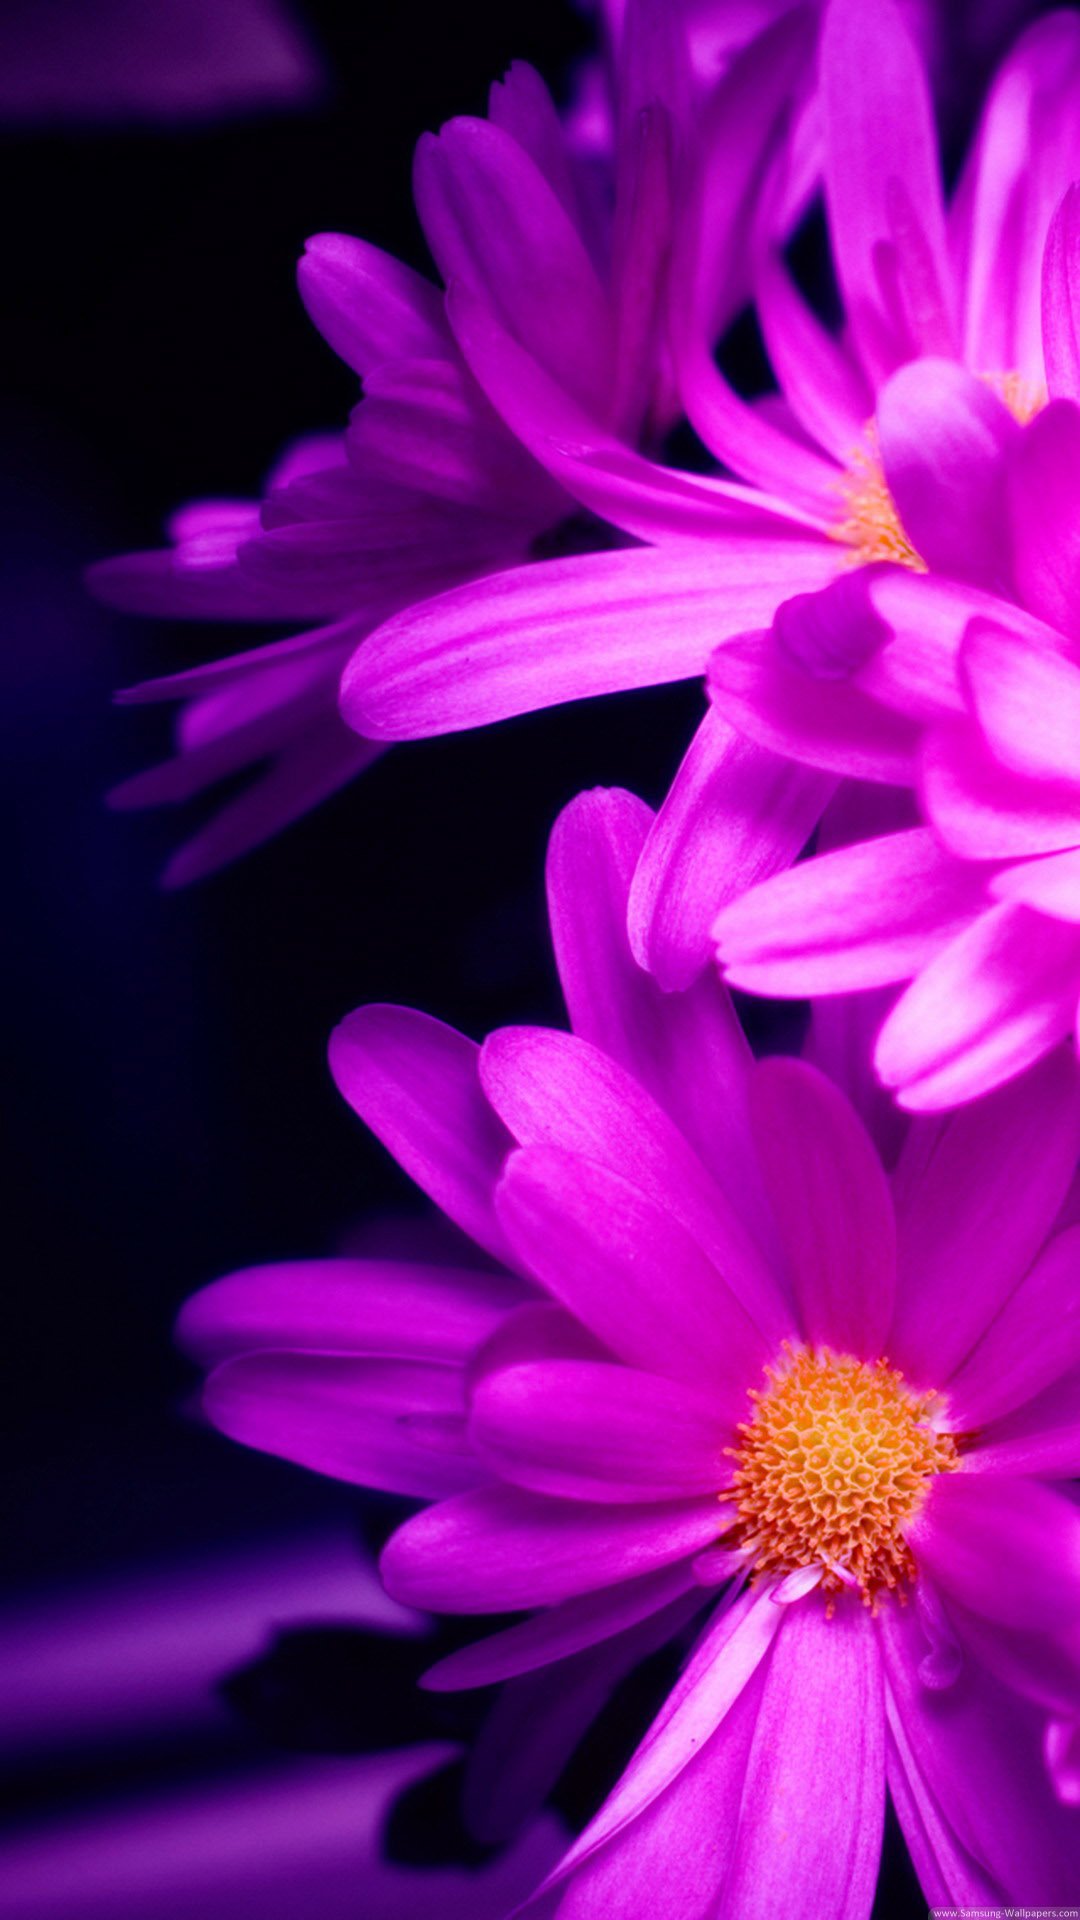 Pink Daisy Wallpaper iPhone 6 Plus preview 1080x1920